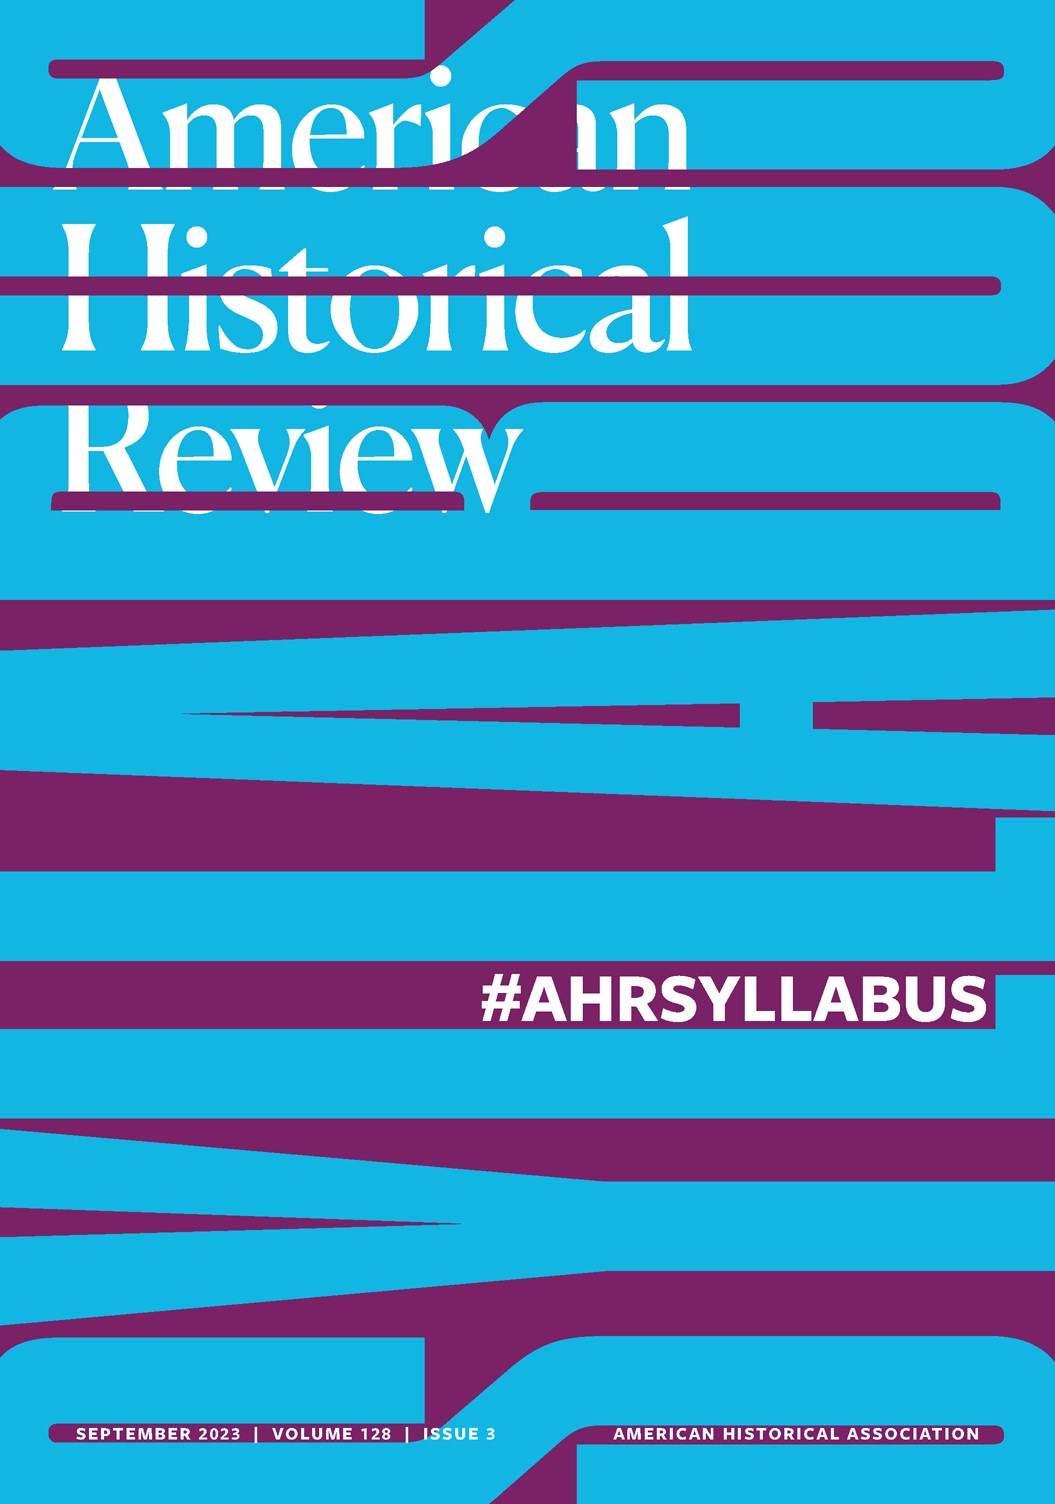 September 2023 cover of the American Historical Review